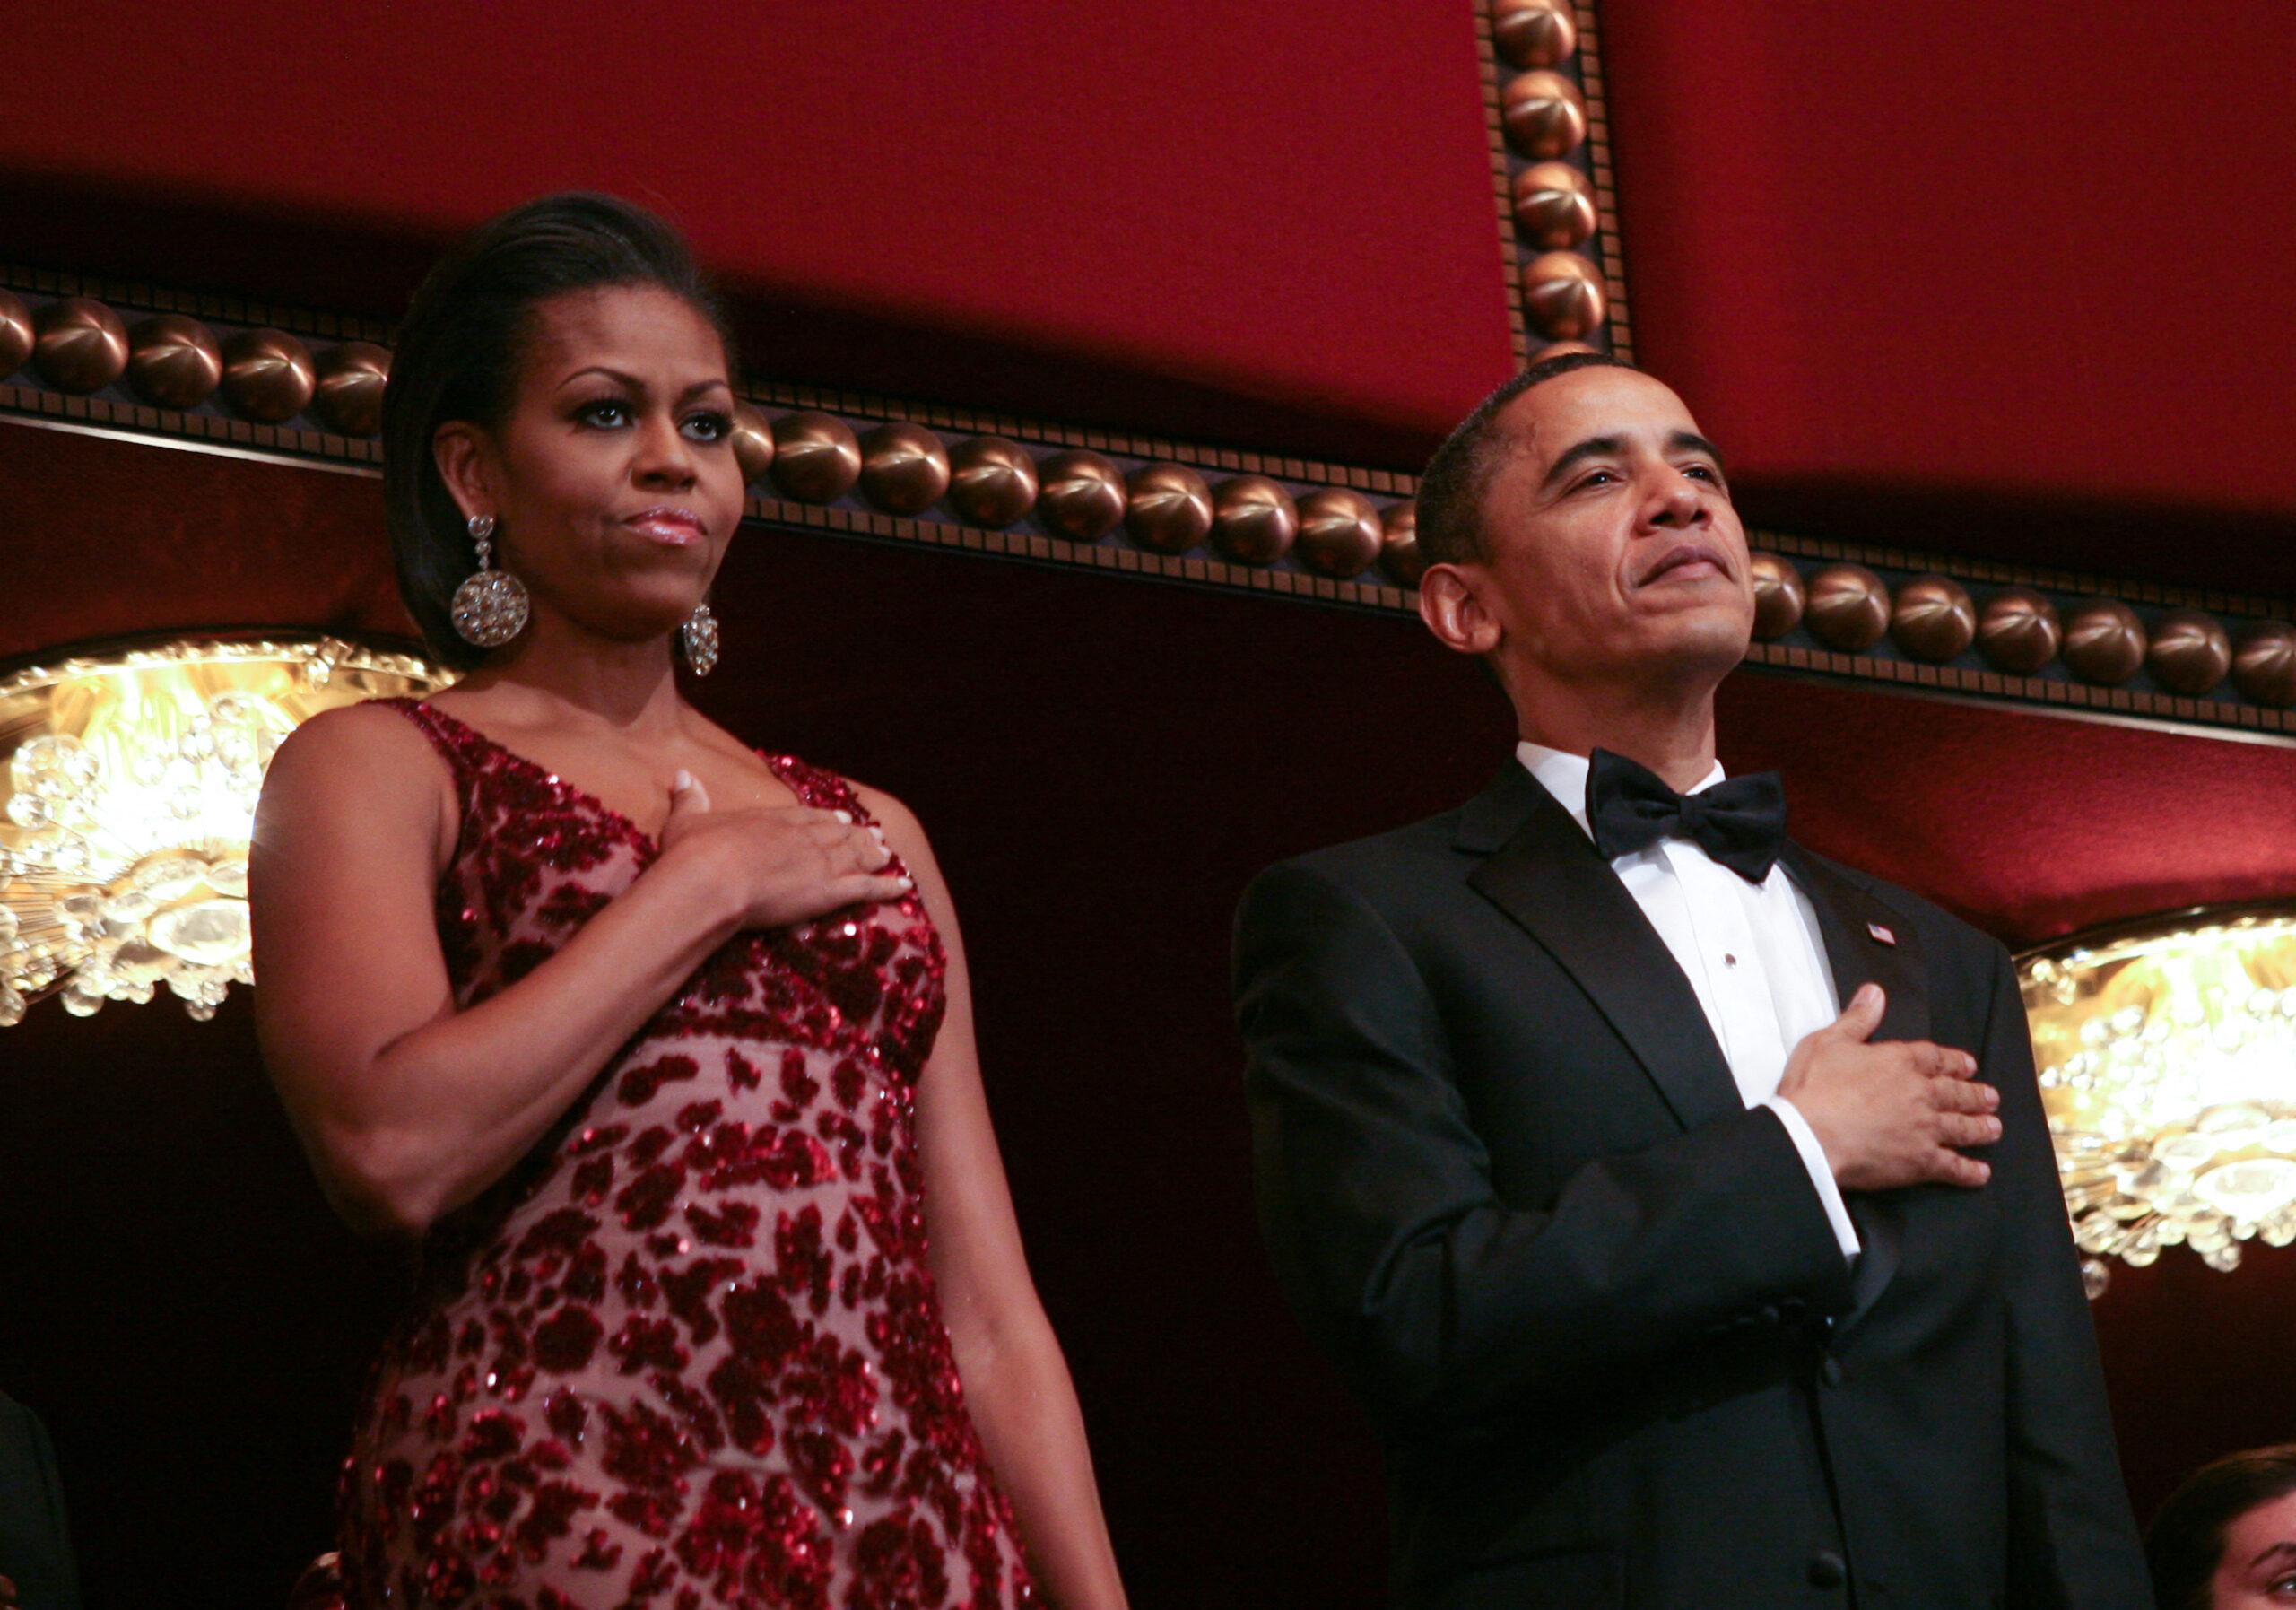 Barack Obama and Michelle Obama attend the 2010 Kennedy Center Honors Ceremony in Washington, D.C. on December 5, 2010.